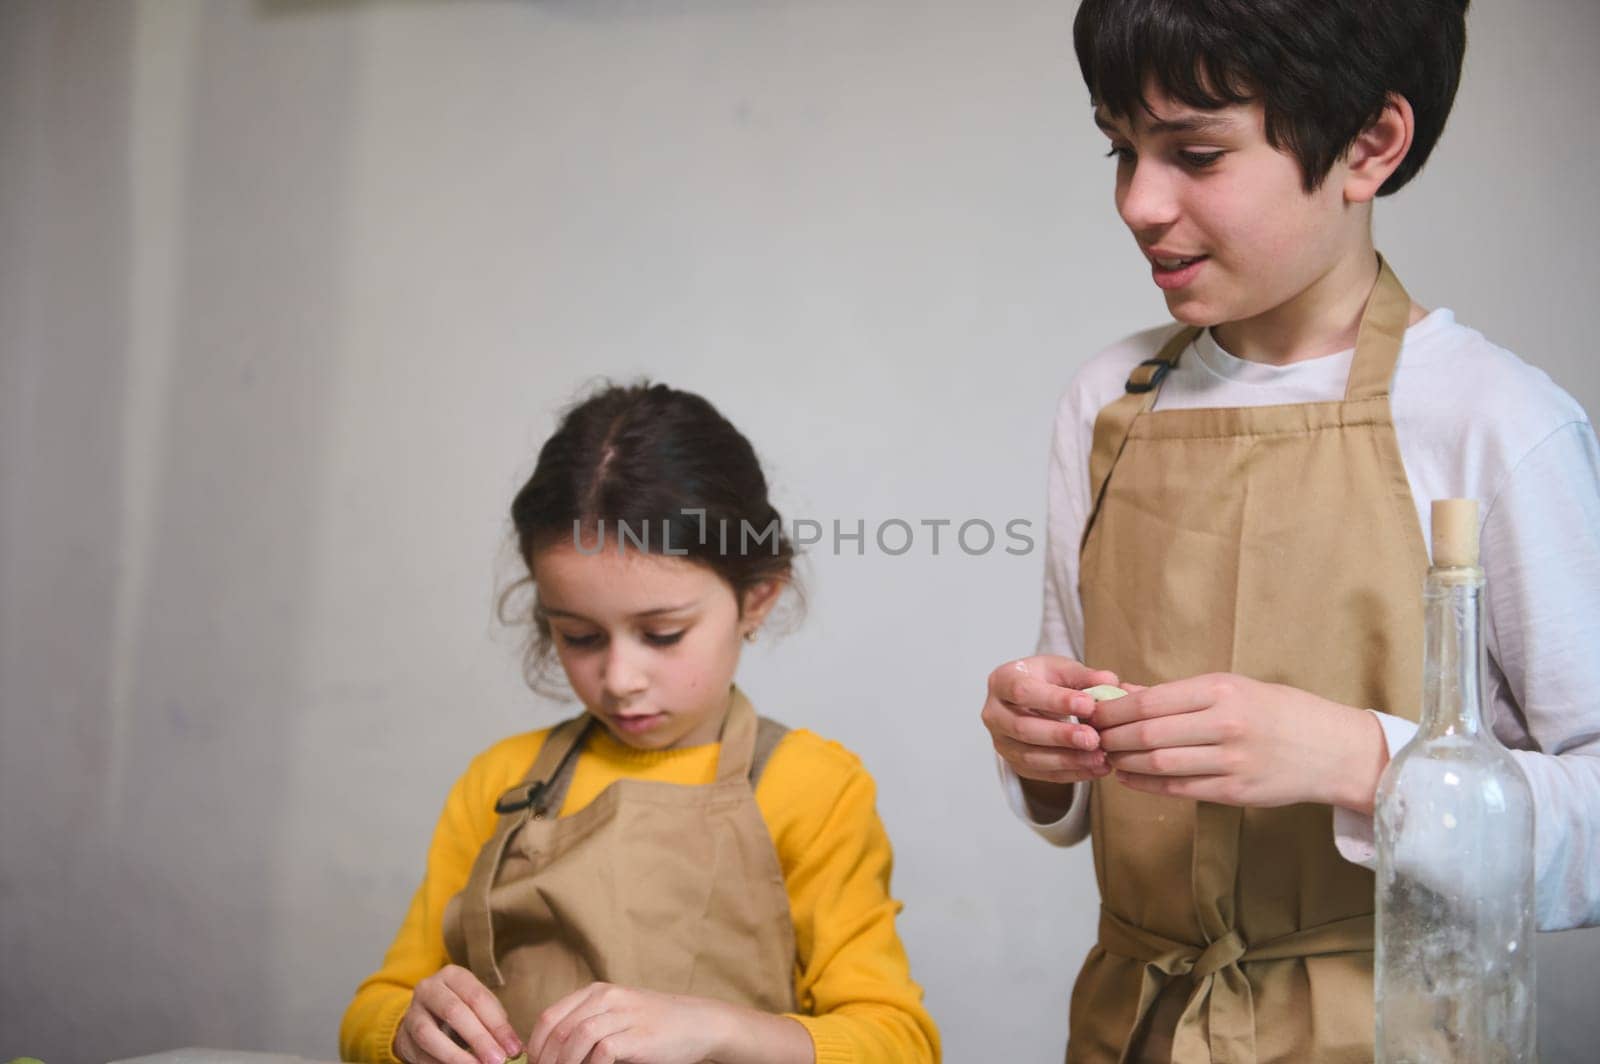 Boy and girl learning culinary at cooking class, making homemade dumplings with mashed potato filling, standing at floured kitchen table with ingredients at rustic kitchen in a rural house